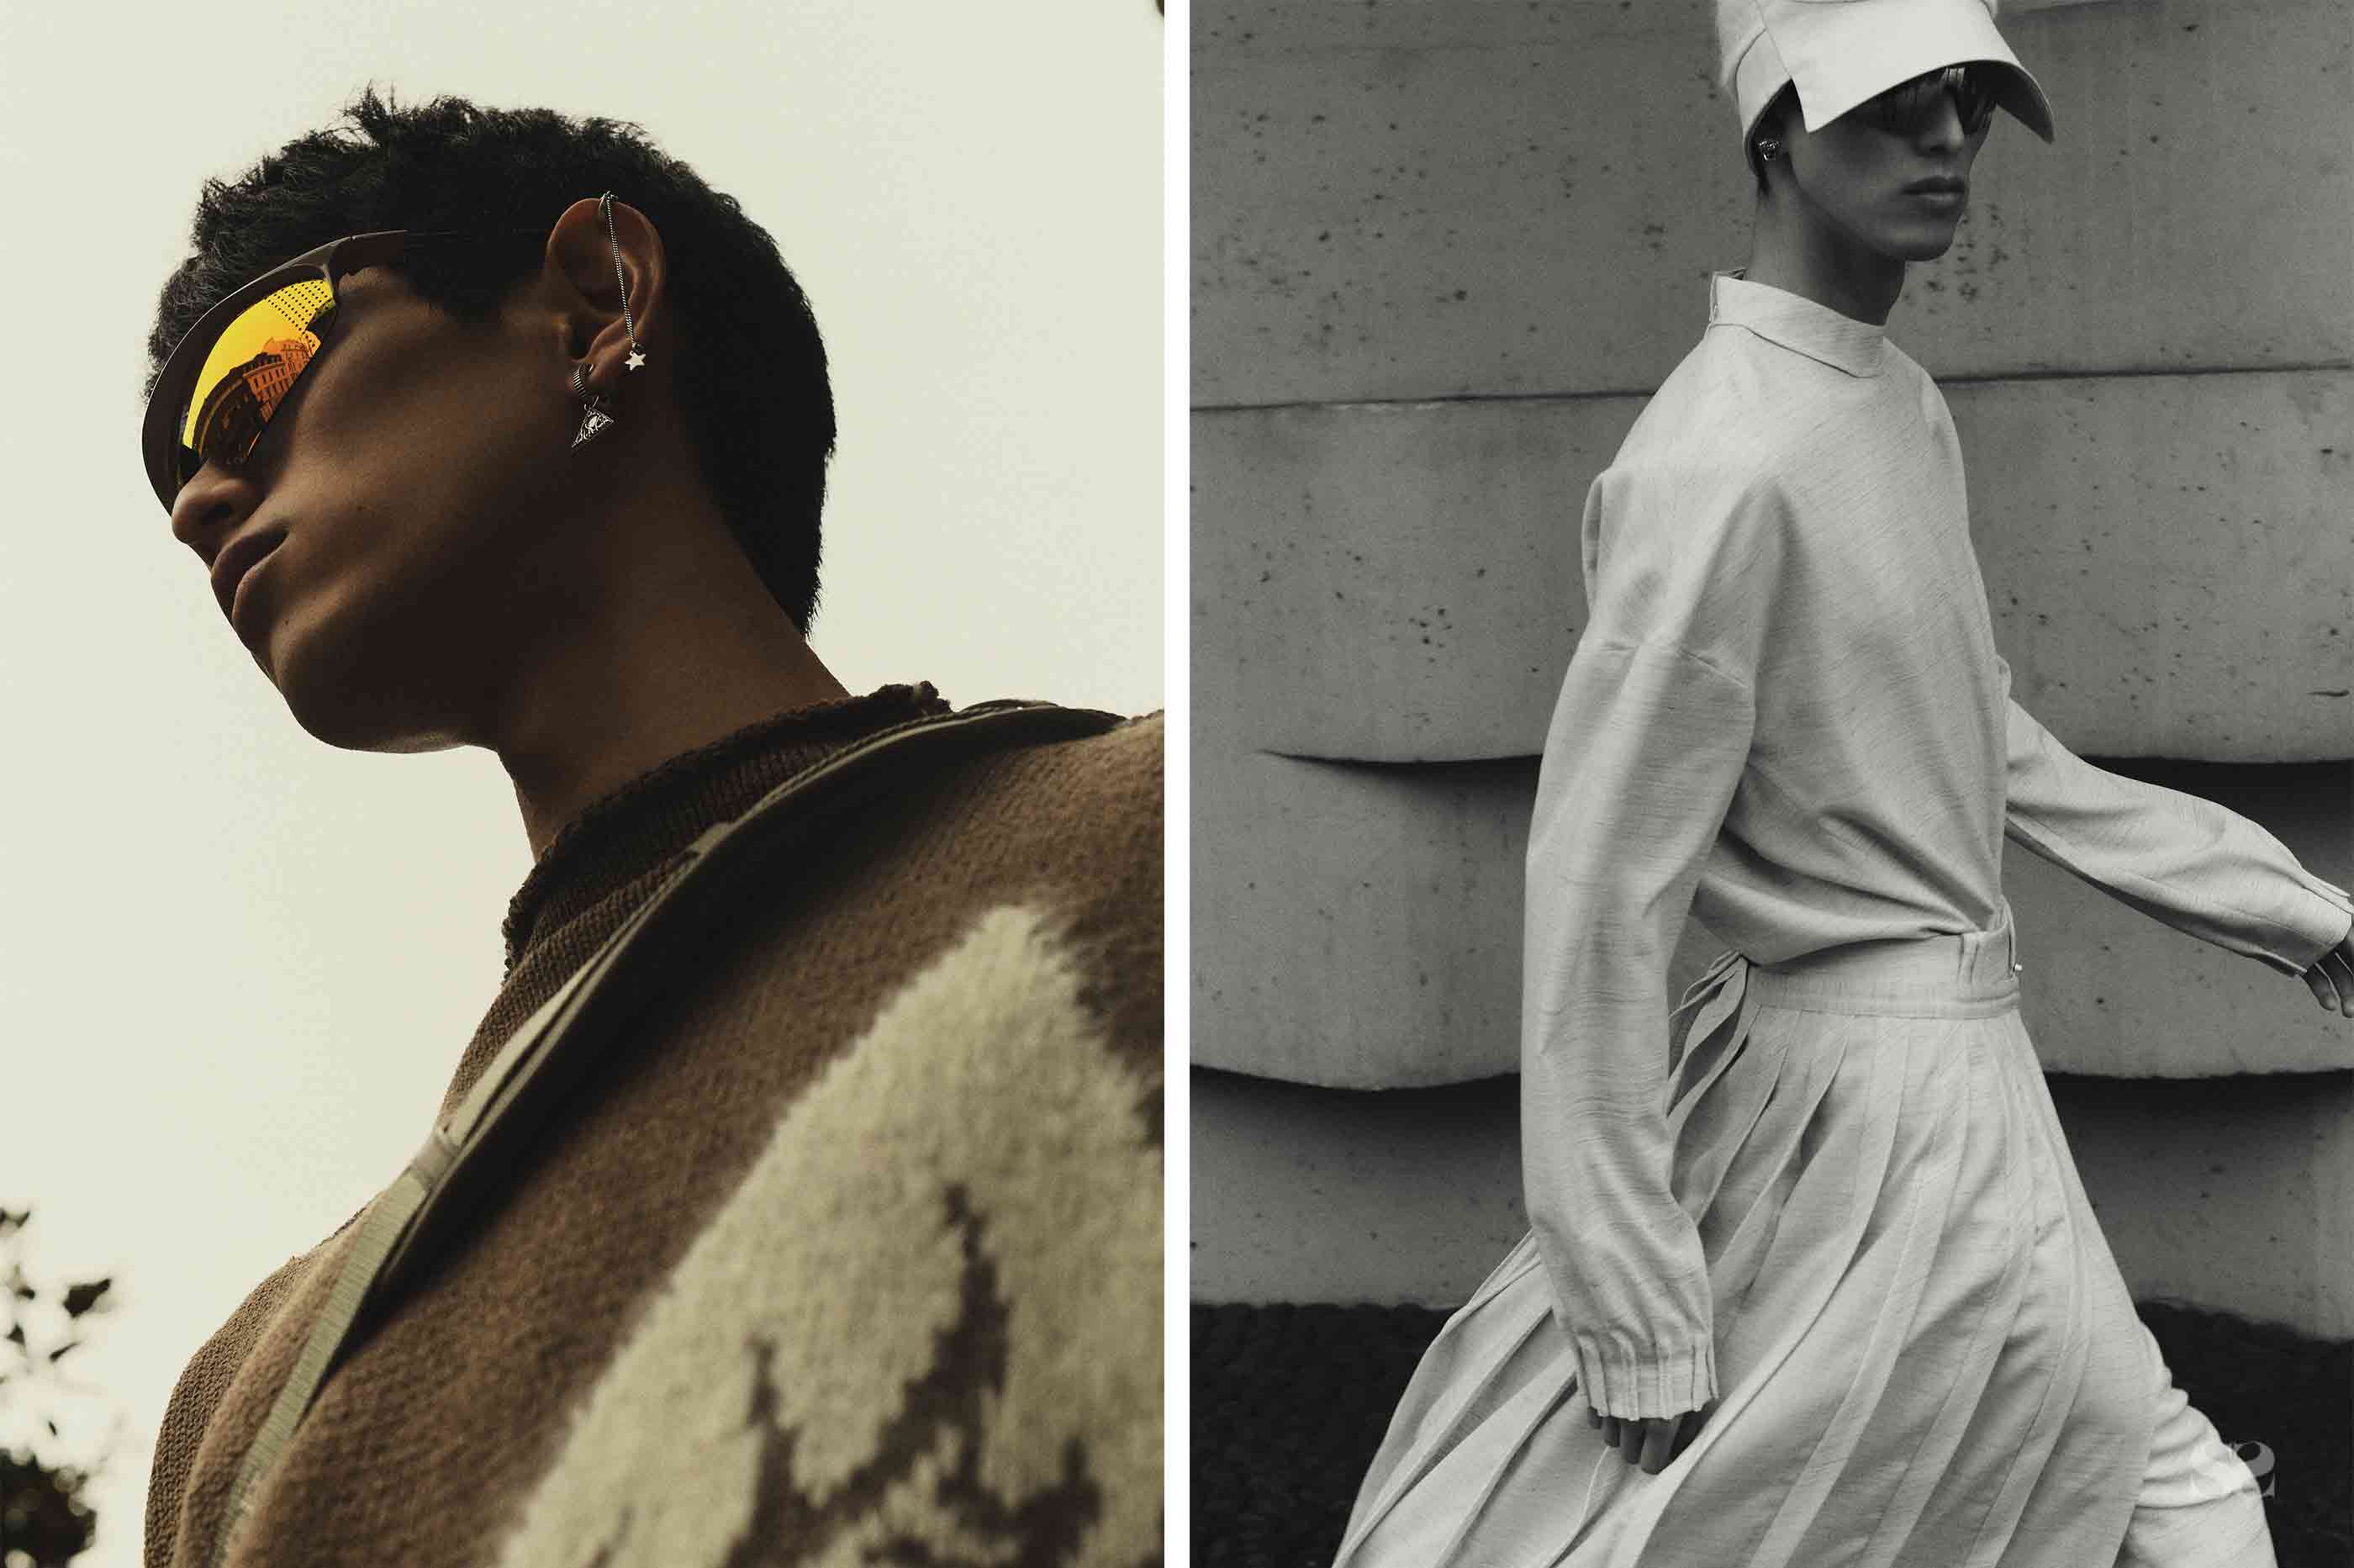 Dior Men pays homage to the peripatetic in the pages of our 'Tempo' issue